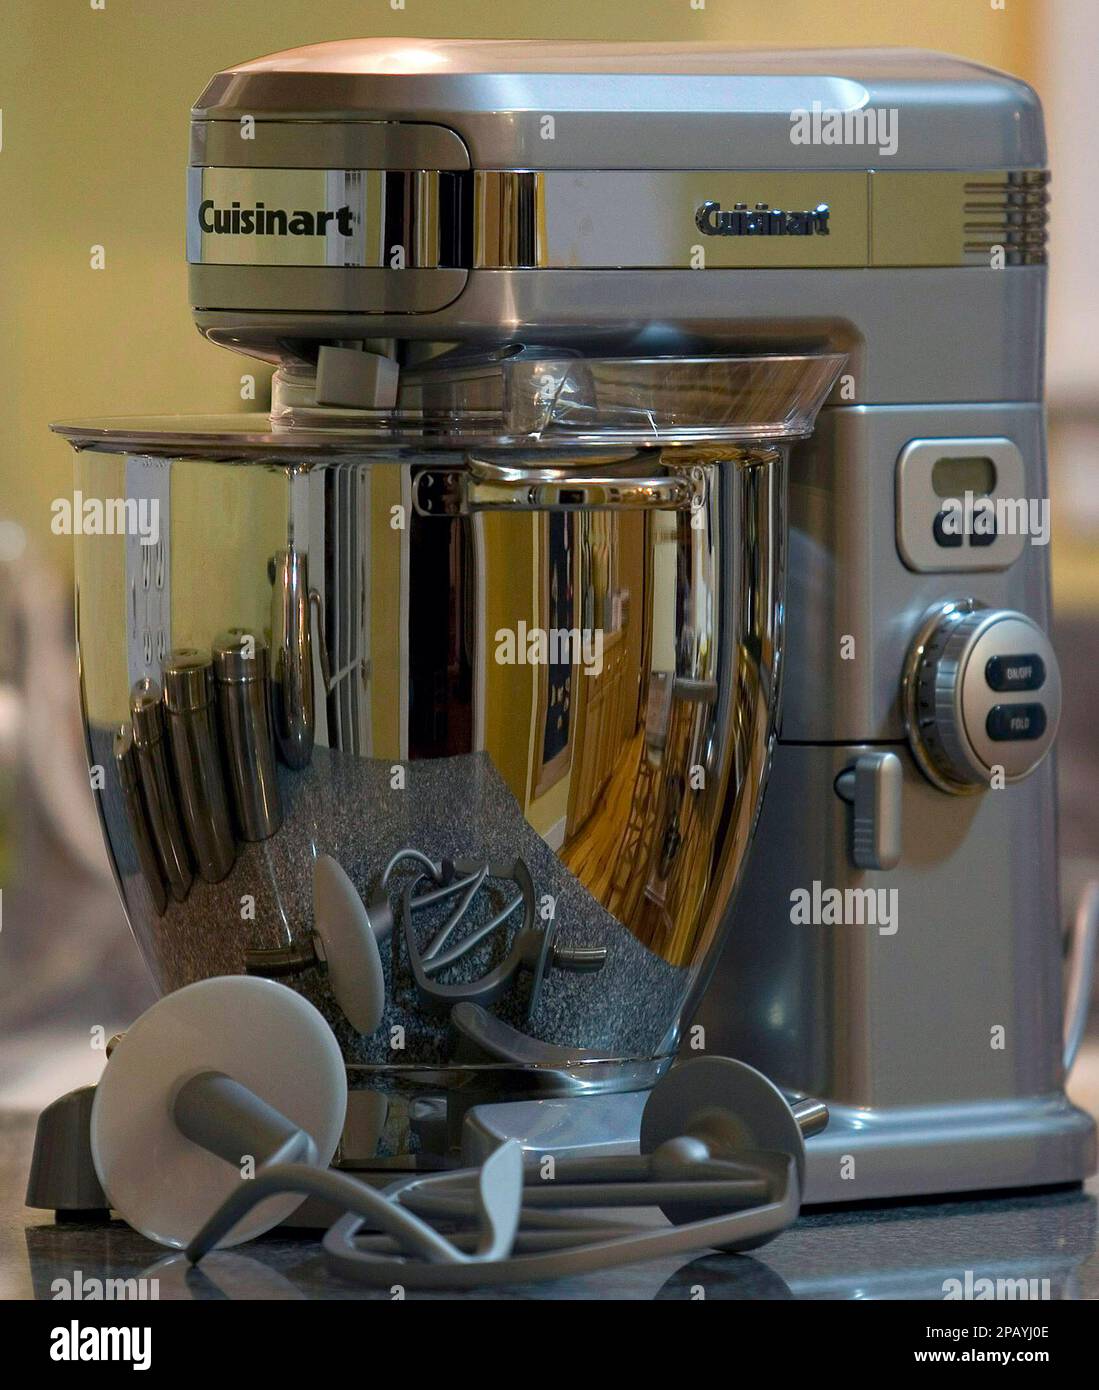 https://c8.alamy.com/comp/2PAYJ0E/for-use-with-ap-lifestyles-the-new-cuisinart-7-quart-stand-mixer-is-seen-in-this-oct-9-2007-photo-features-include-a-built-in-timer-and-a-tall-bowl-to-help-prevent-splashing-during-high-speed-mixing-ap-photolarry-crowe-2PAYJ0E.jpg